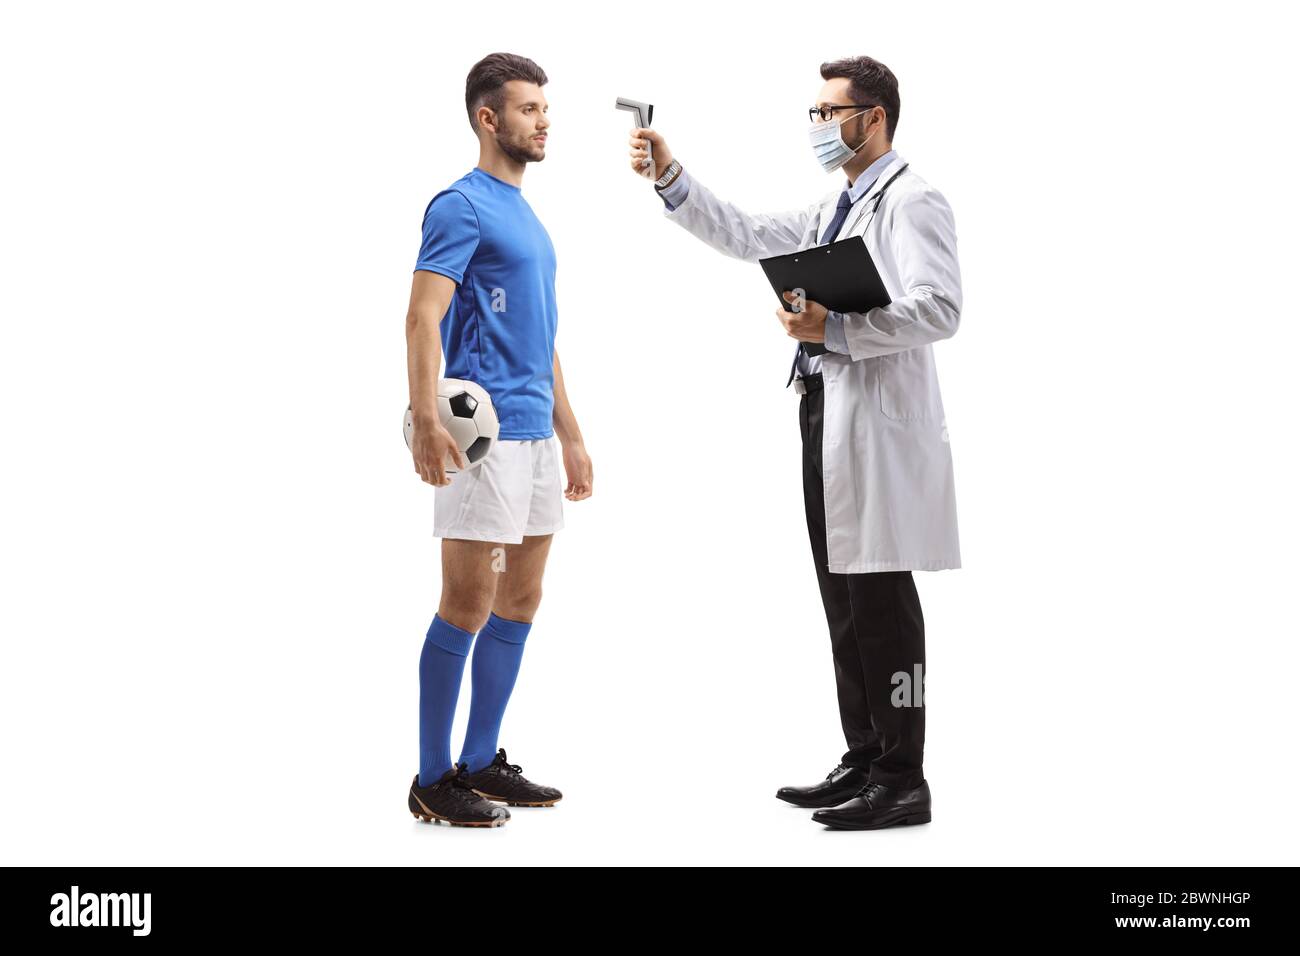 https://c8.alamy.com/comp/2BWNHGP/full-length-profile-shot-of-a-male-doctor-with-a-face-mask-measuring-temperature-to-a-football-player-isolated-on-white-background-2BWNHGP.jpg